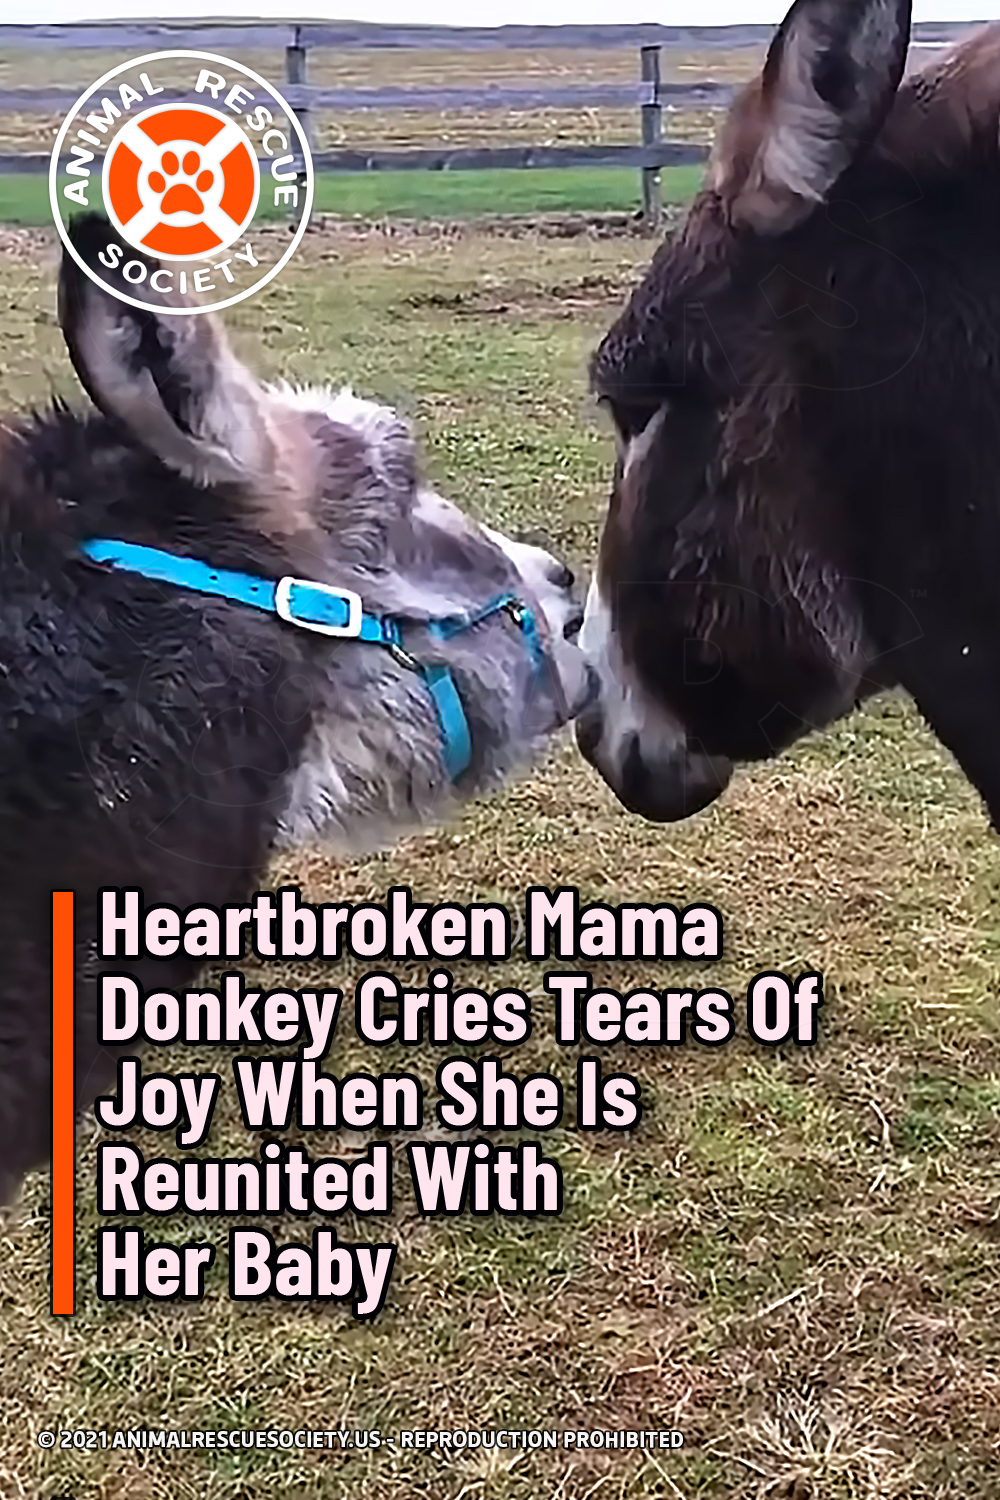 Heartbroken Mama Donkey Cries Tears Of Joy When She Is Reunited With Her Baby